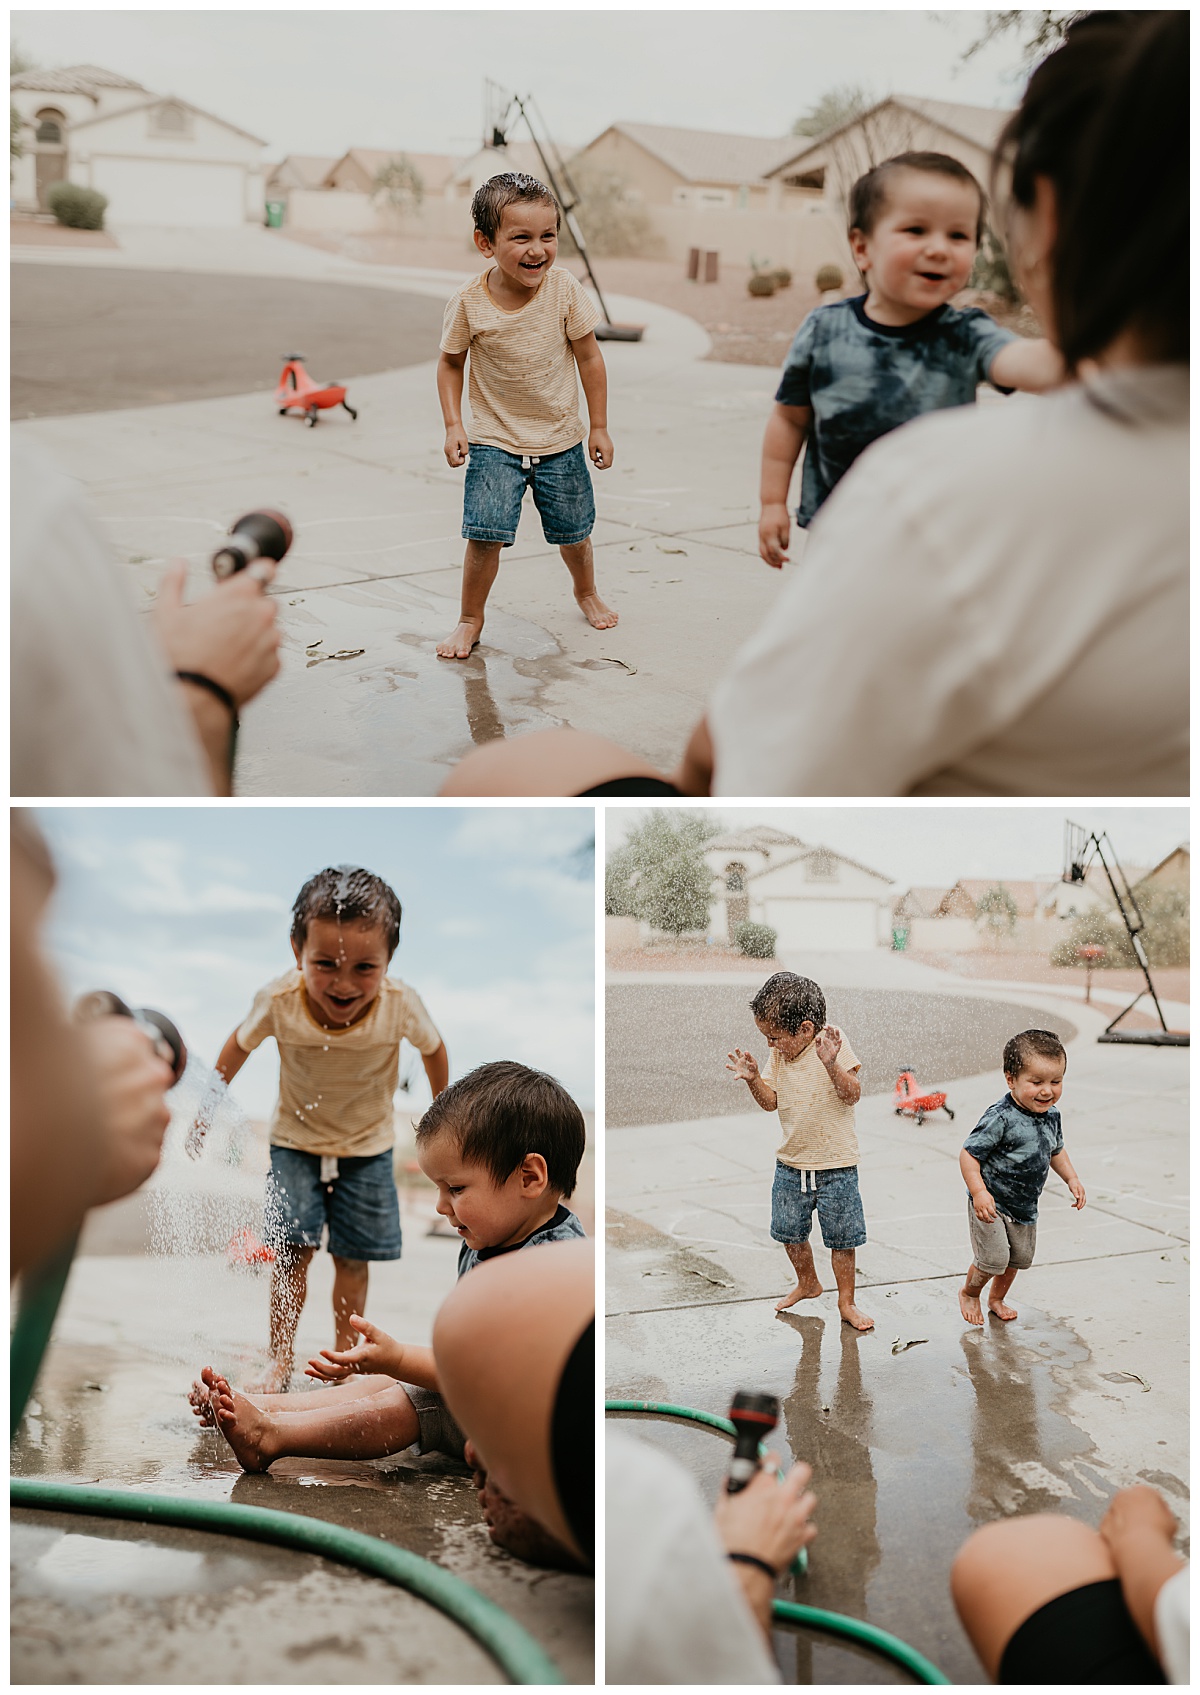 Mom and dad spraying boys with the water hose in the driveway for a summer family session inTucson, Arizona taken by Alexa Rae Photo, a Tucson Family Photographer.